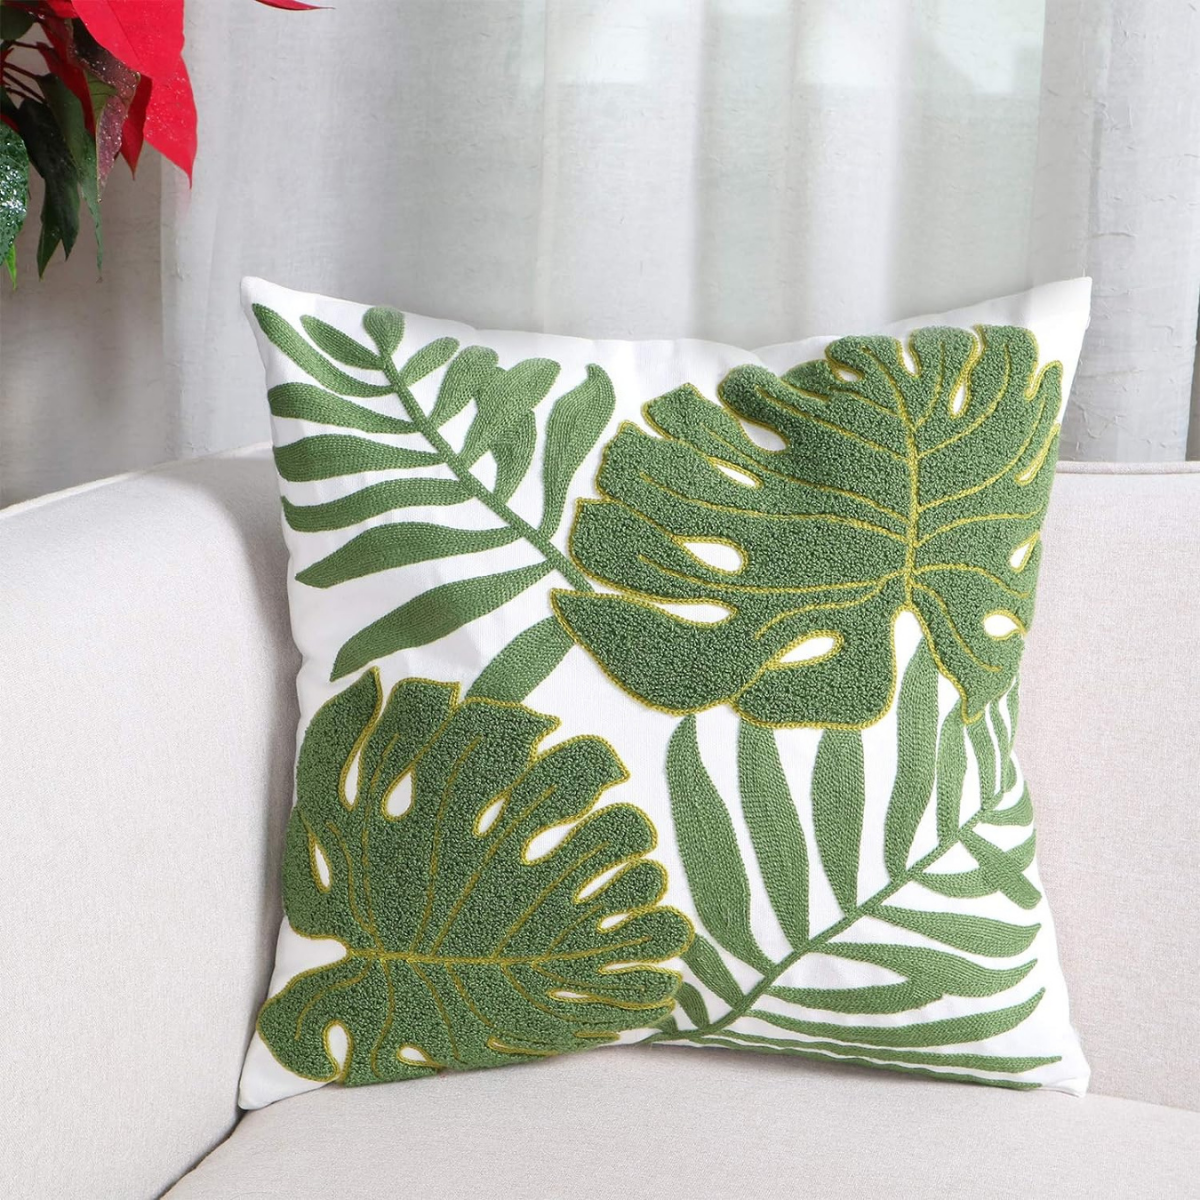 Turn Your Space Into a Tropical Oasis With These Summer Decor Pieces That Bring Vacation Vibes Home